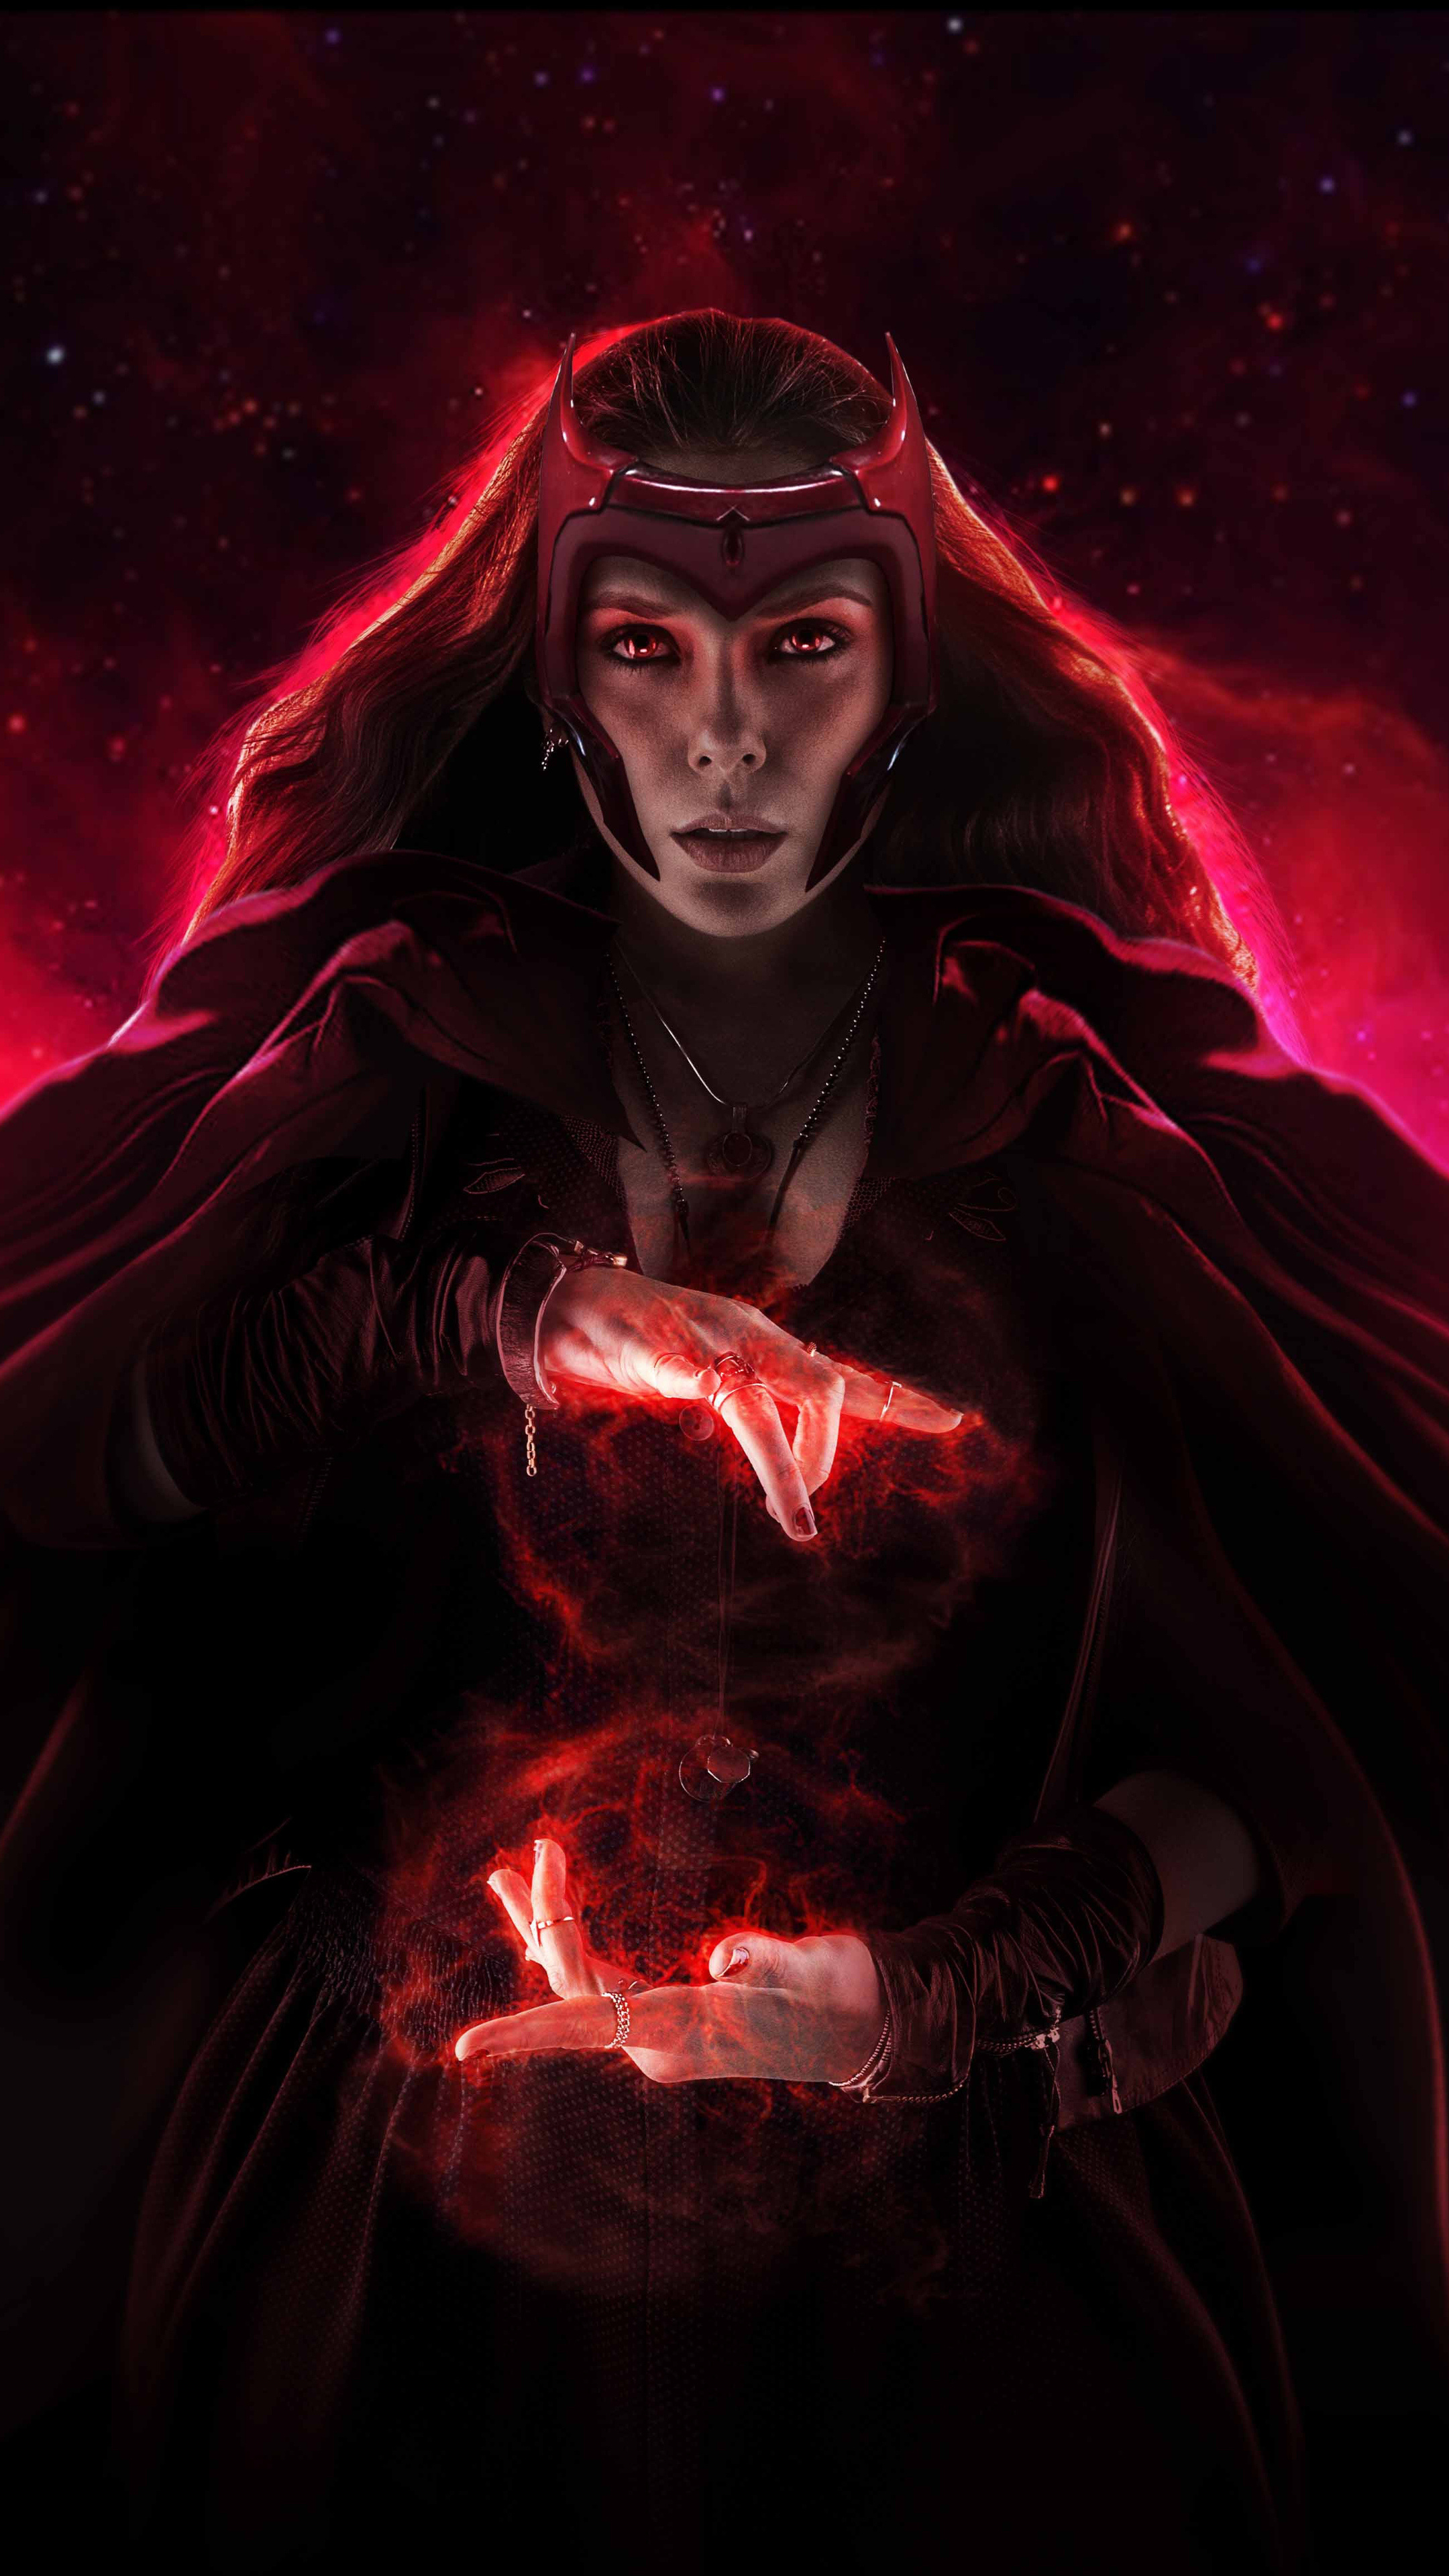 Scarlet Witch, Sony Xperia, 4K wallpapers, Images, 2160x3840 4K Handy